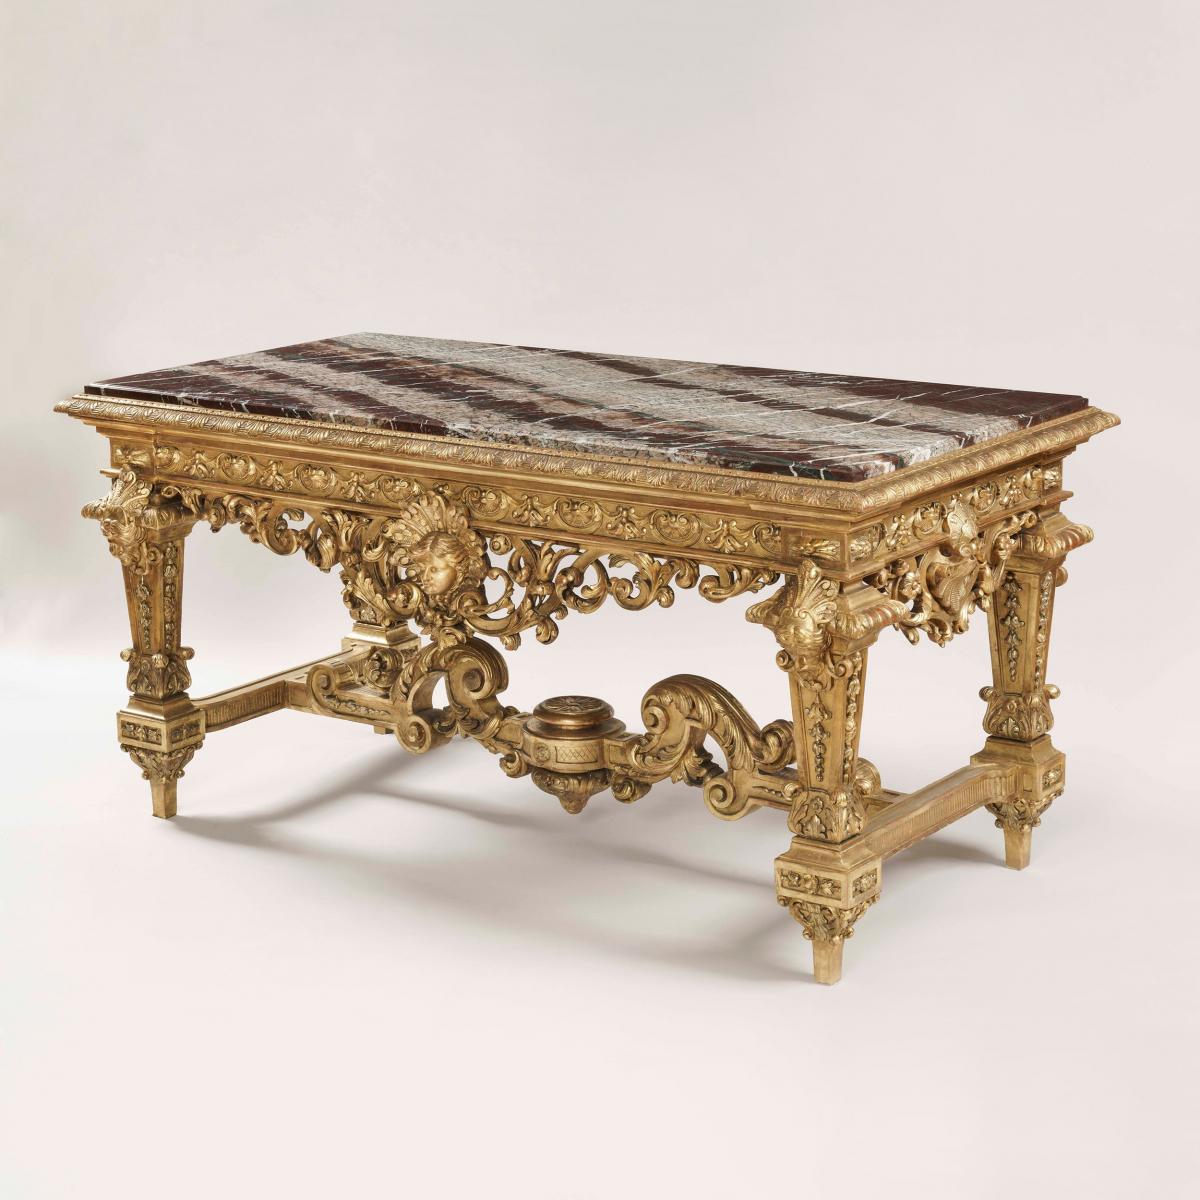 Exceptional Giltwood Table de Milieu in the Louis XIV Style